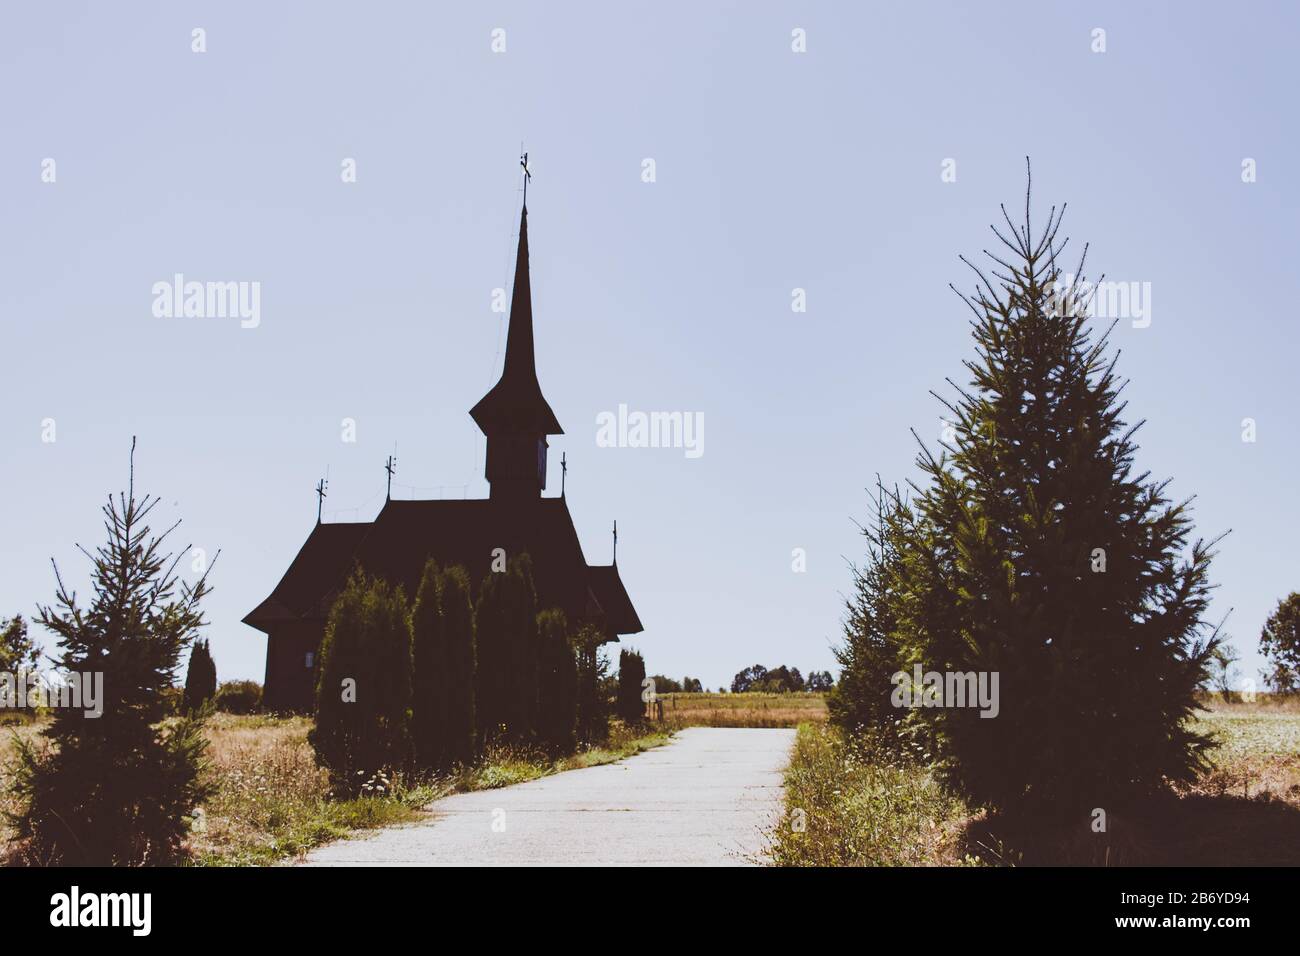 Vintage view of an old wooden church with thuja trees alongside the alleyway in Maramures Stock Photo